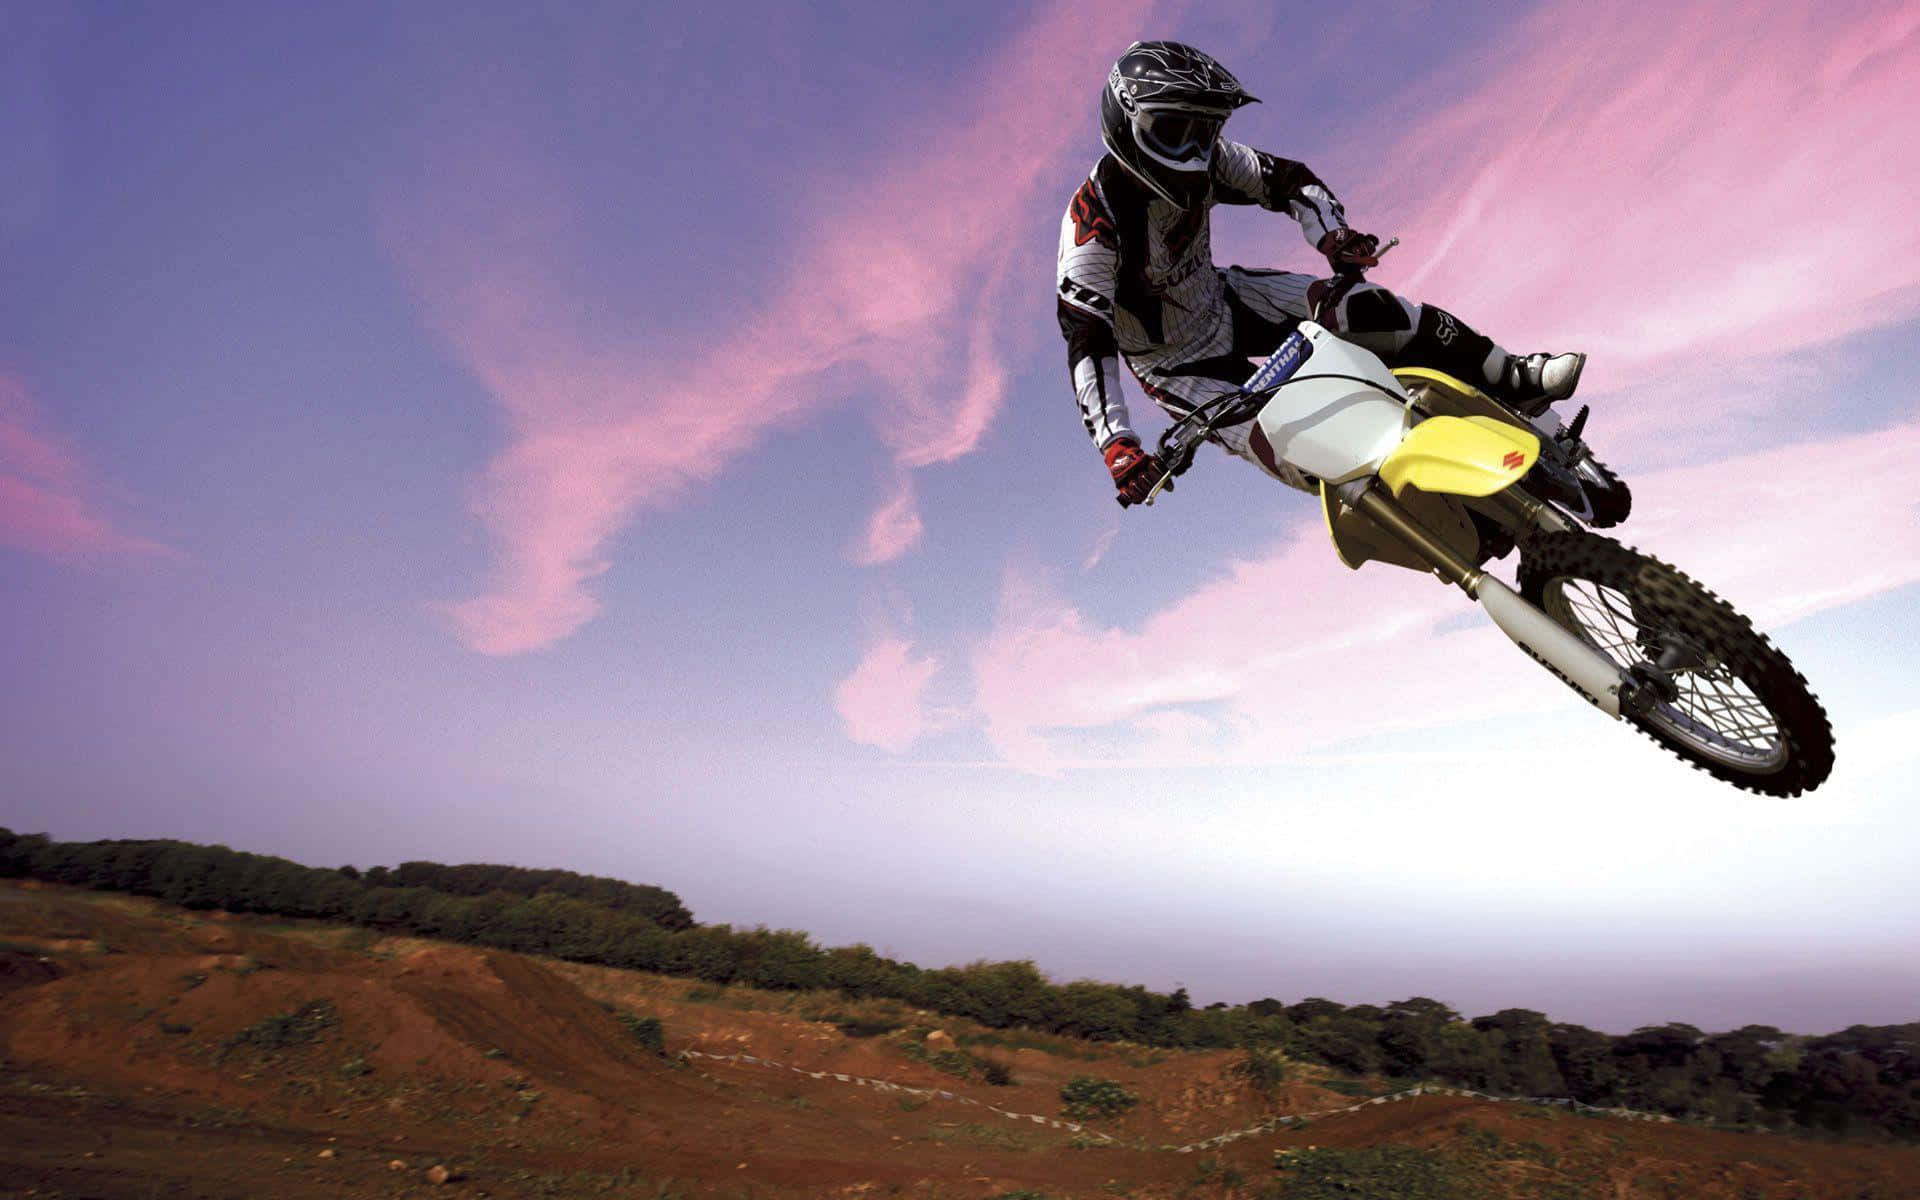 Motocross rider catching air on dirt track